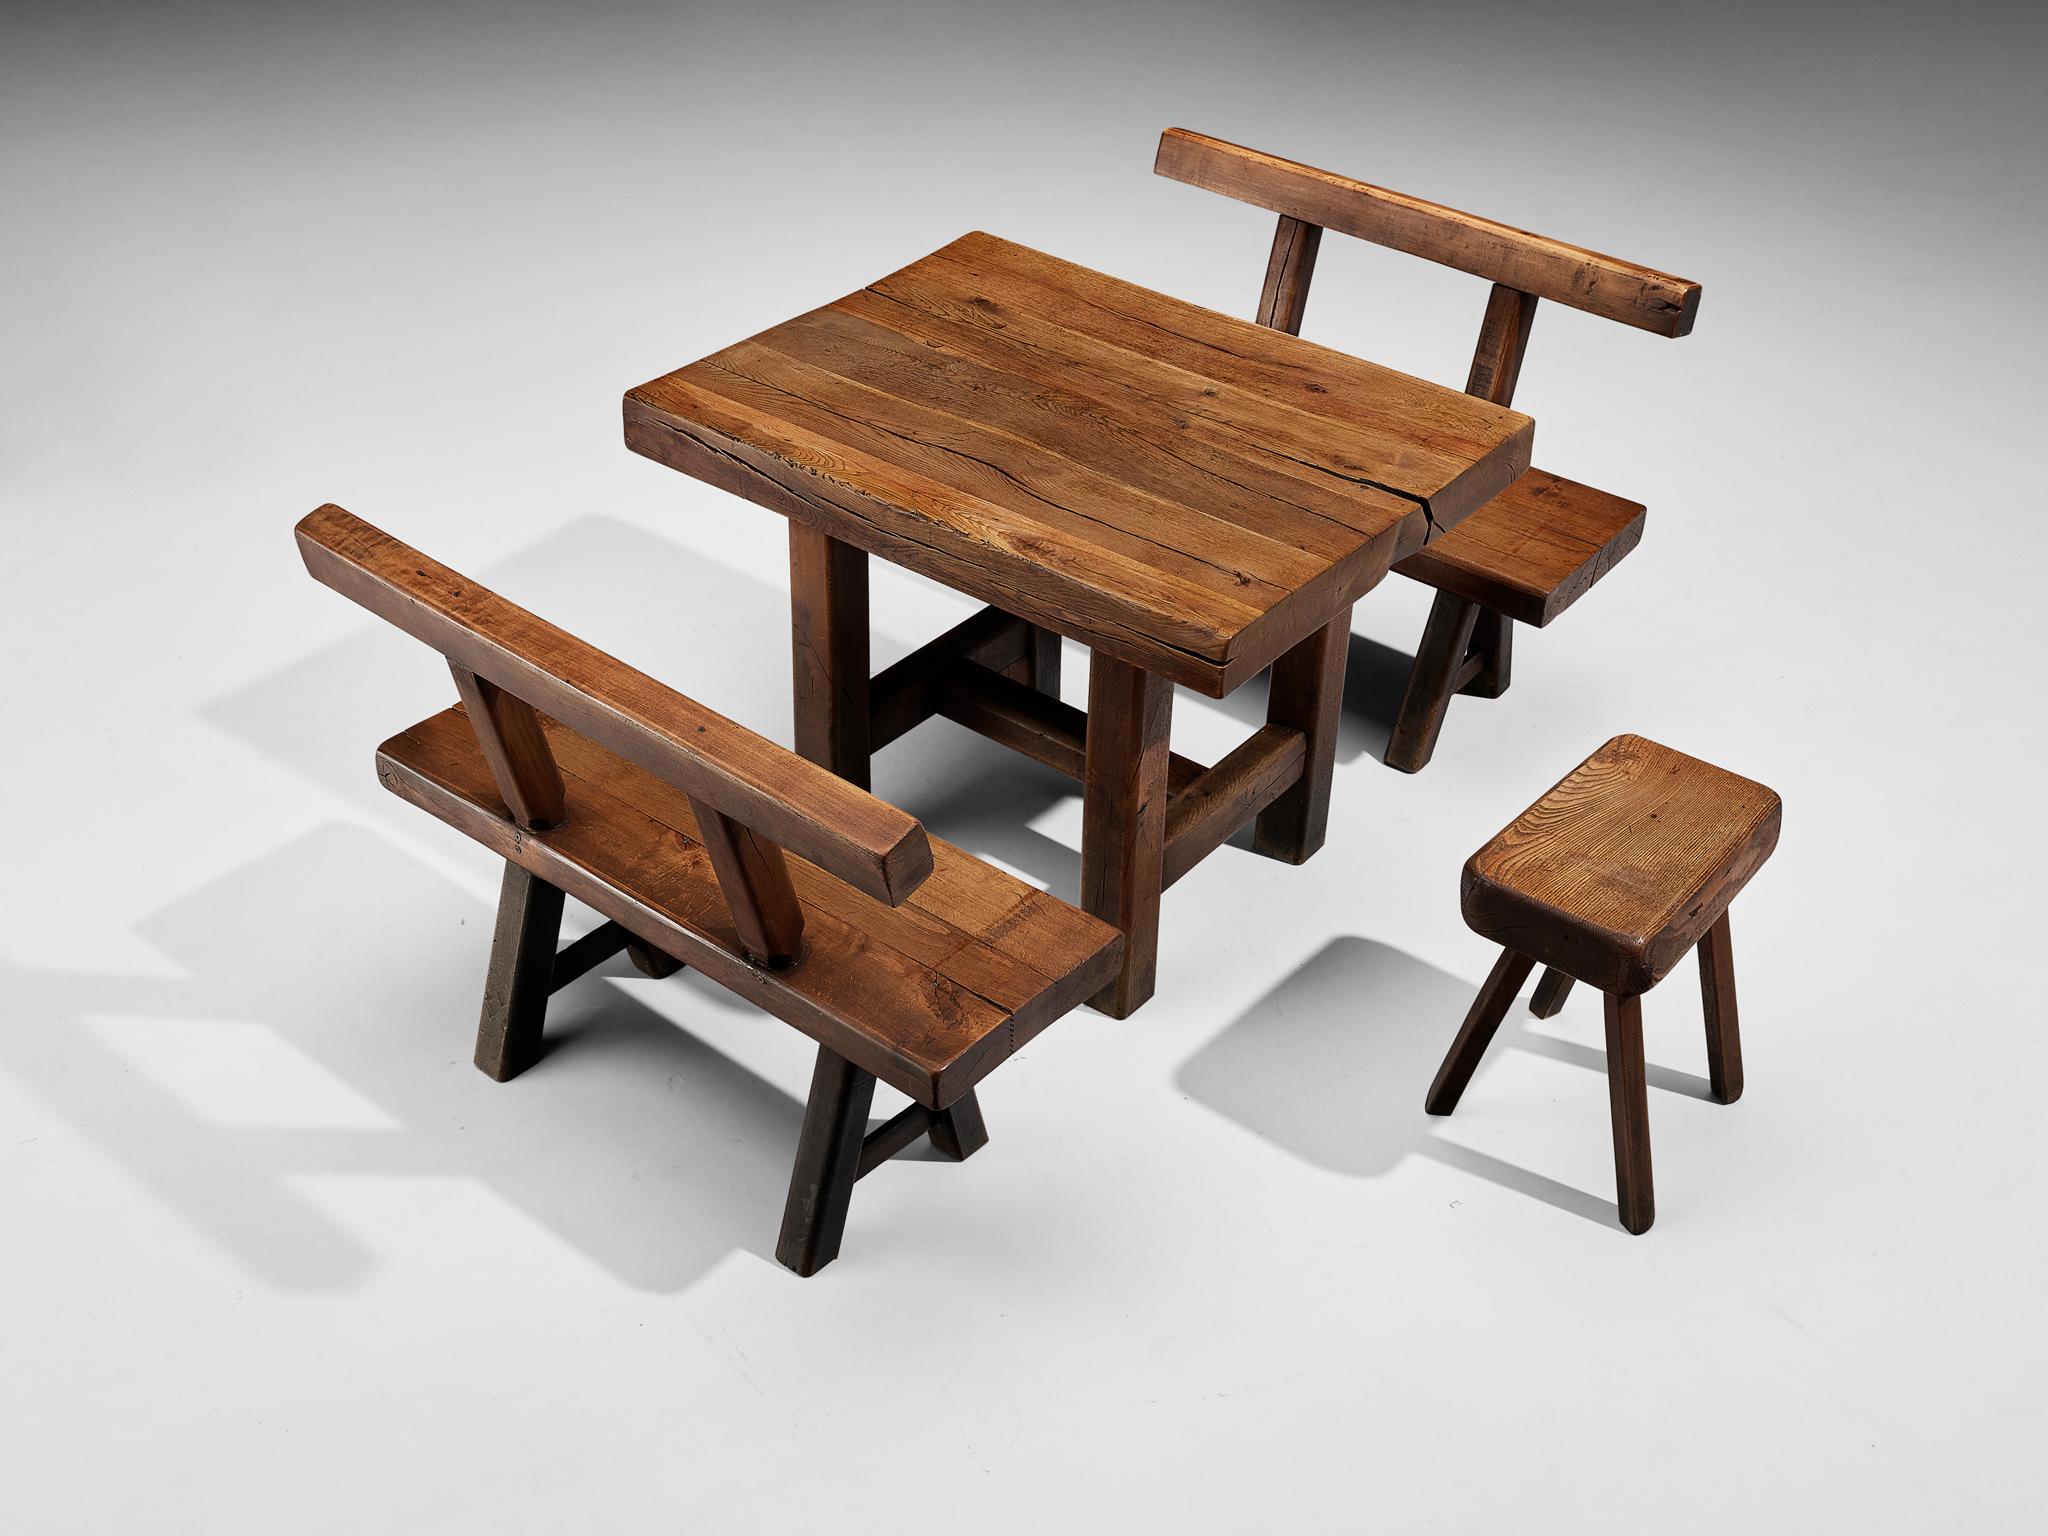 Mobichalet, set of dining table - pair of benches - stool, oak, beech, Belgium, 1950s

This rustic dining set will come forward nicely in a relaxing atmosphere, like a patio or a studio space. The brutalist appearance is expressed through robust